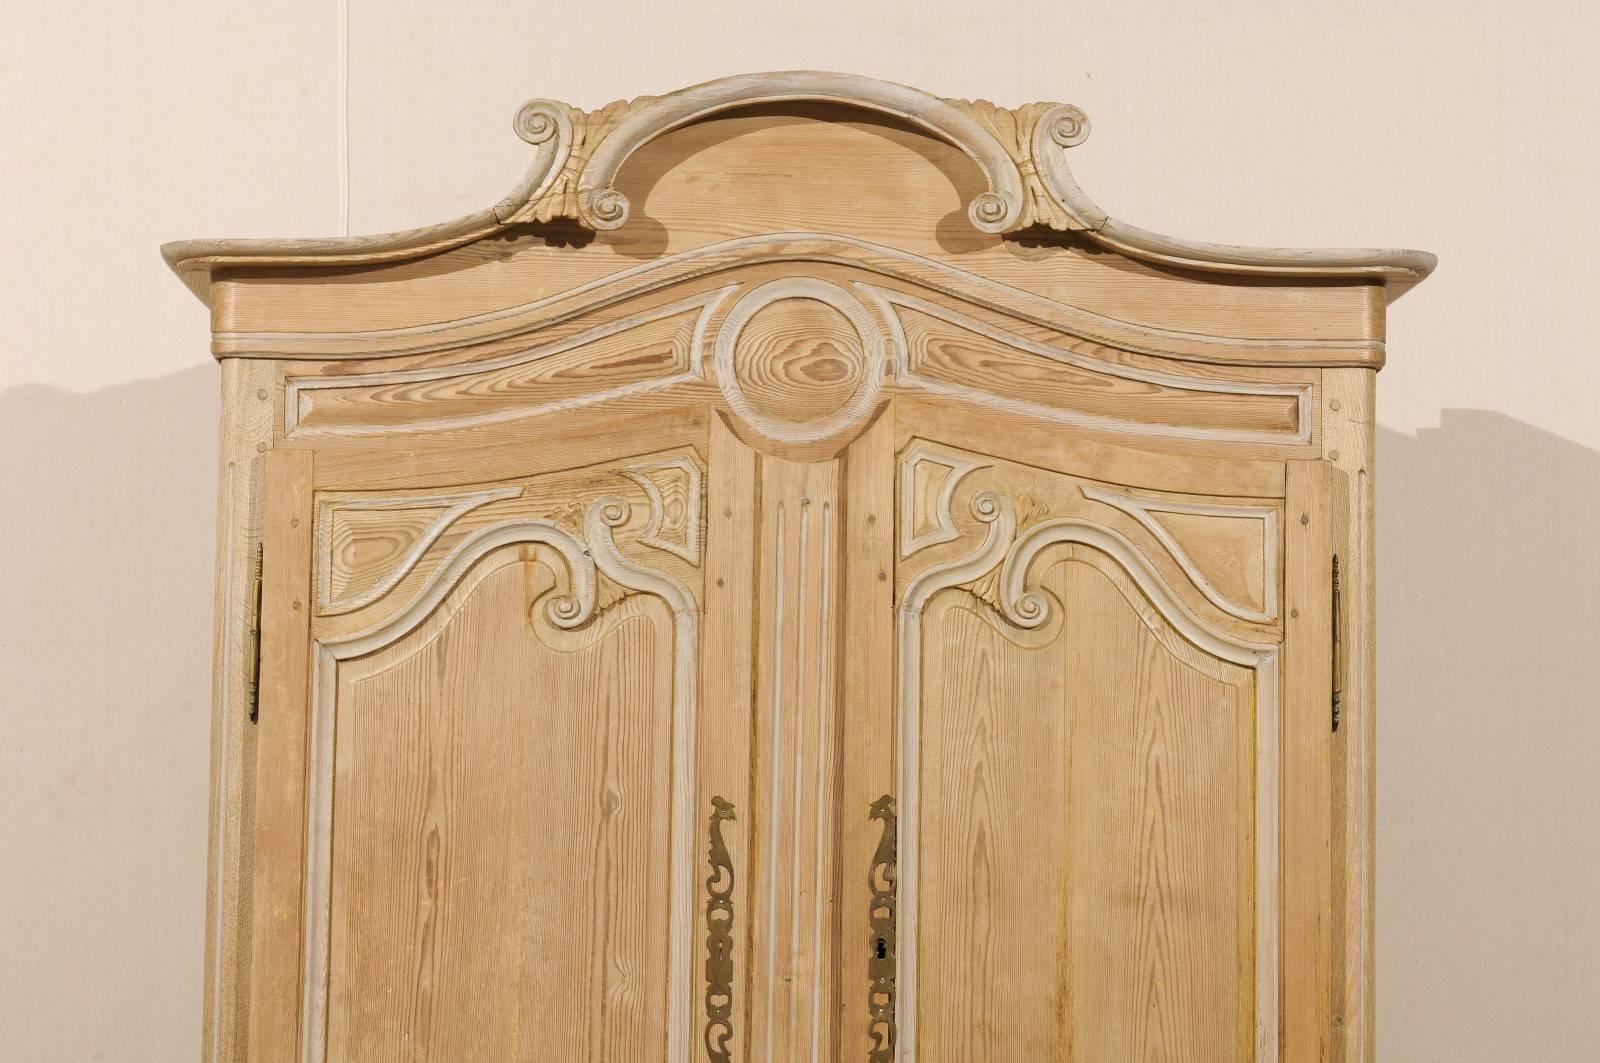 Painted A Lovely French Buffet à Deux Corps Nicely Adorn w/ Pediment Bonnet, 19th C. For Sale